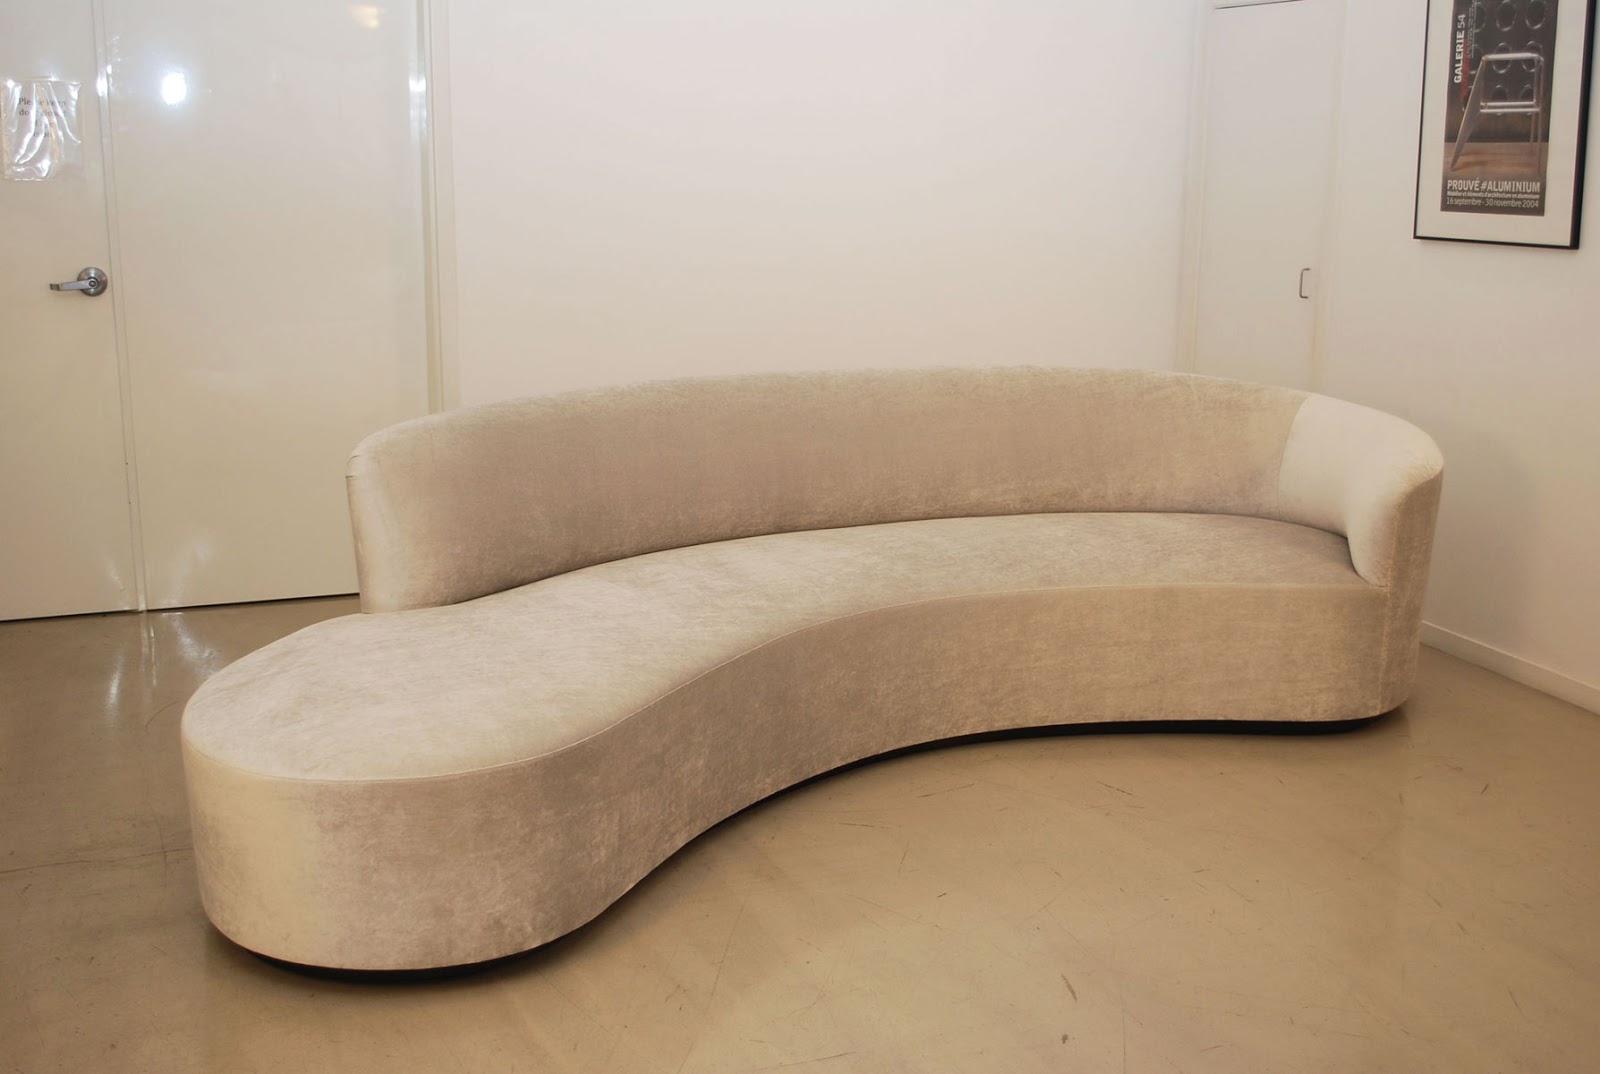 curved back leather sofa contemporary